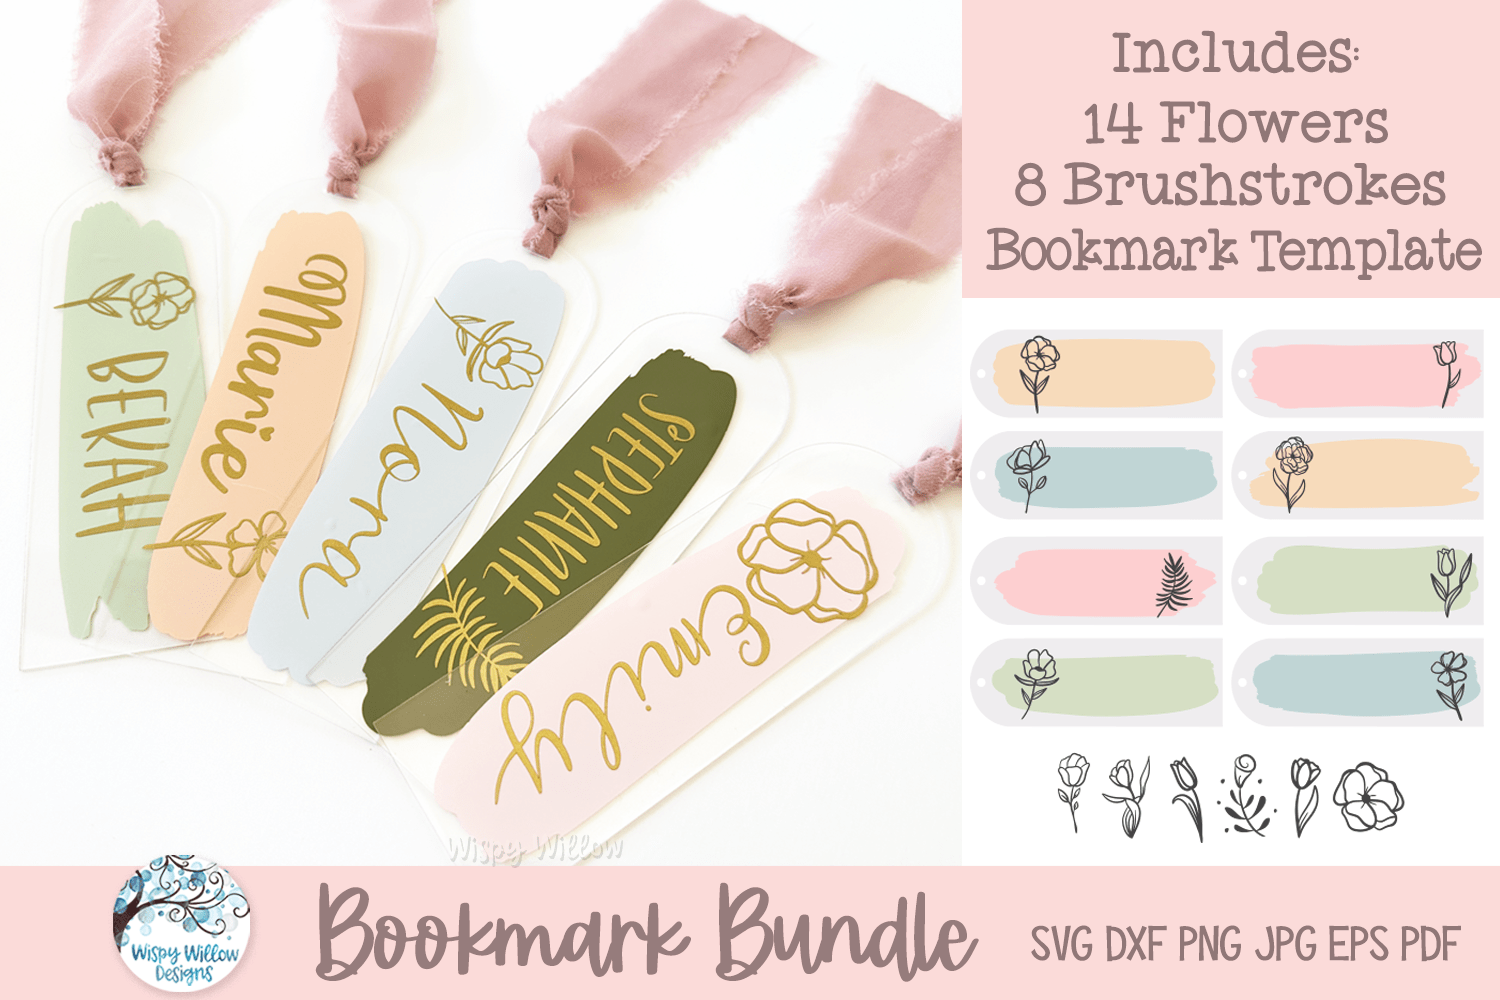 Bookmark SVG Bundle | Personalized Floral Bookmark with Paint Brushstroke Designs Wispy Willow Designs Company